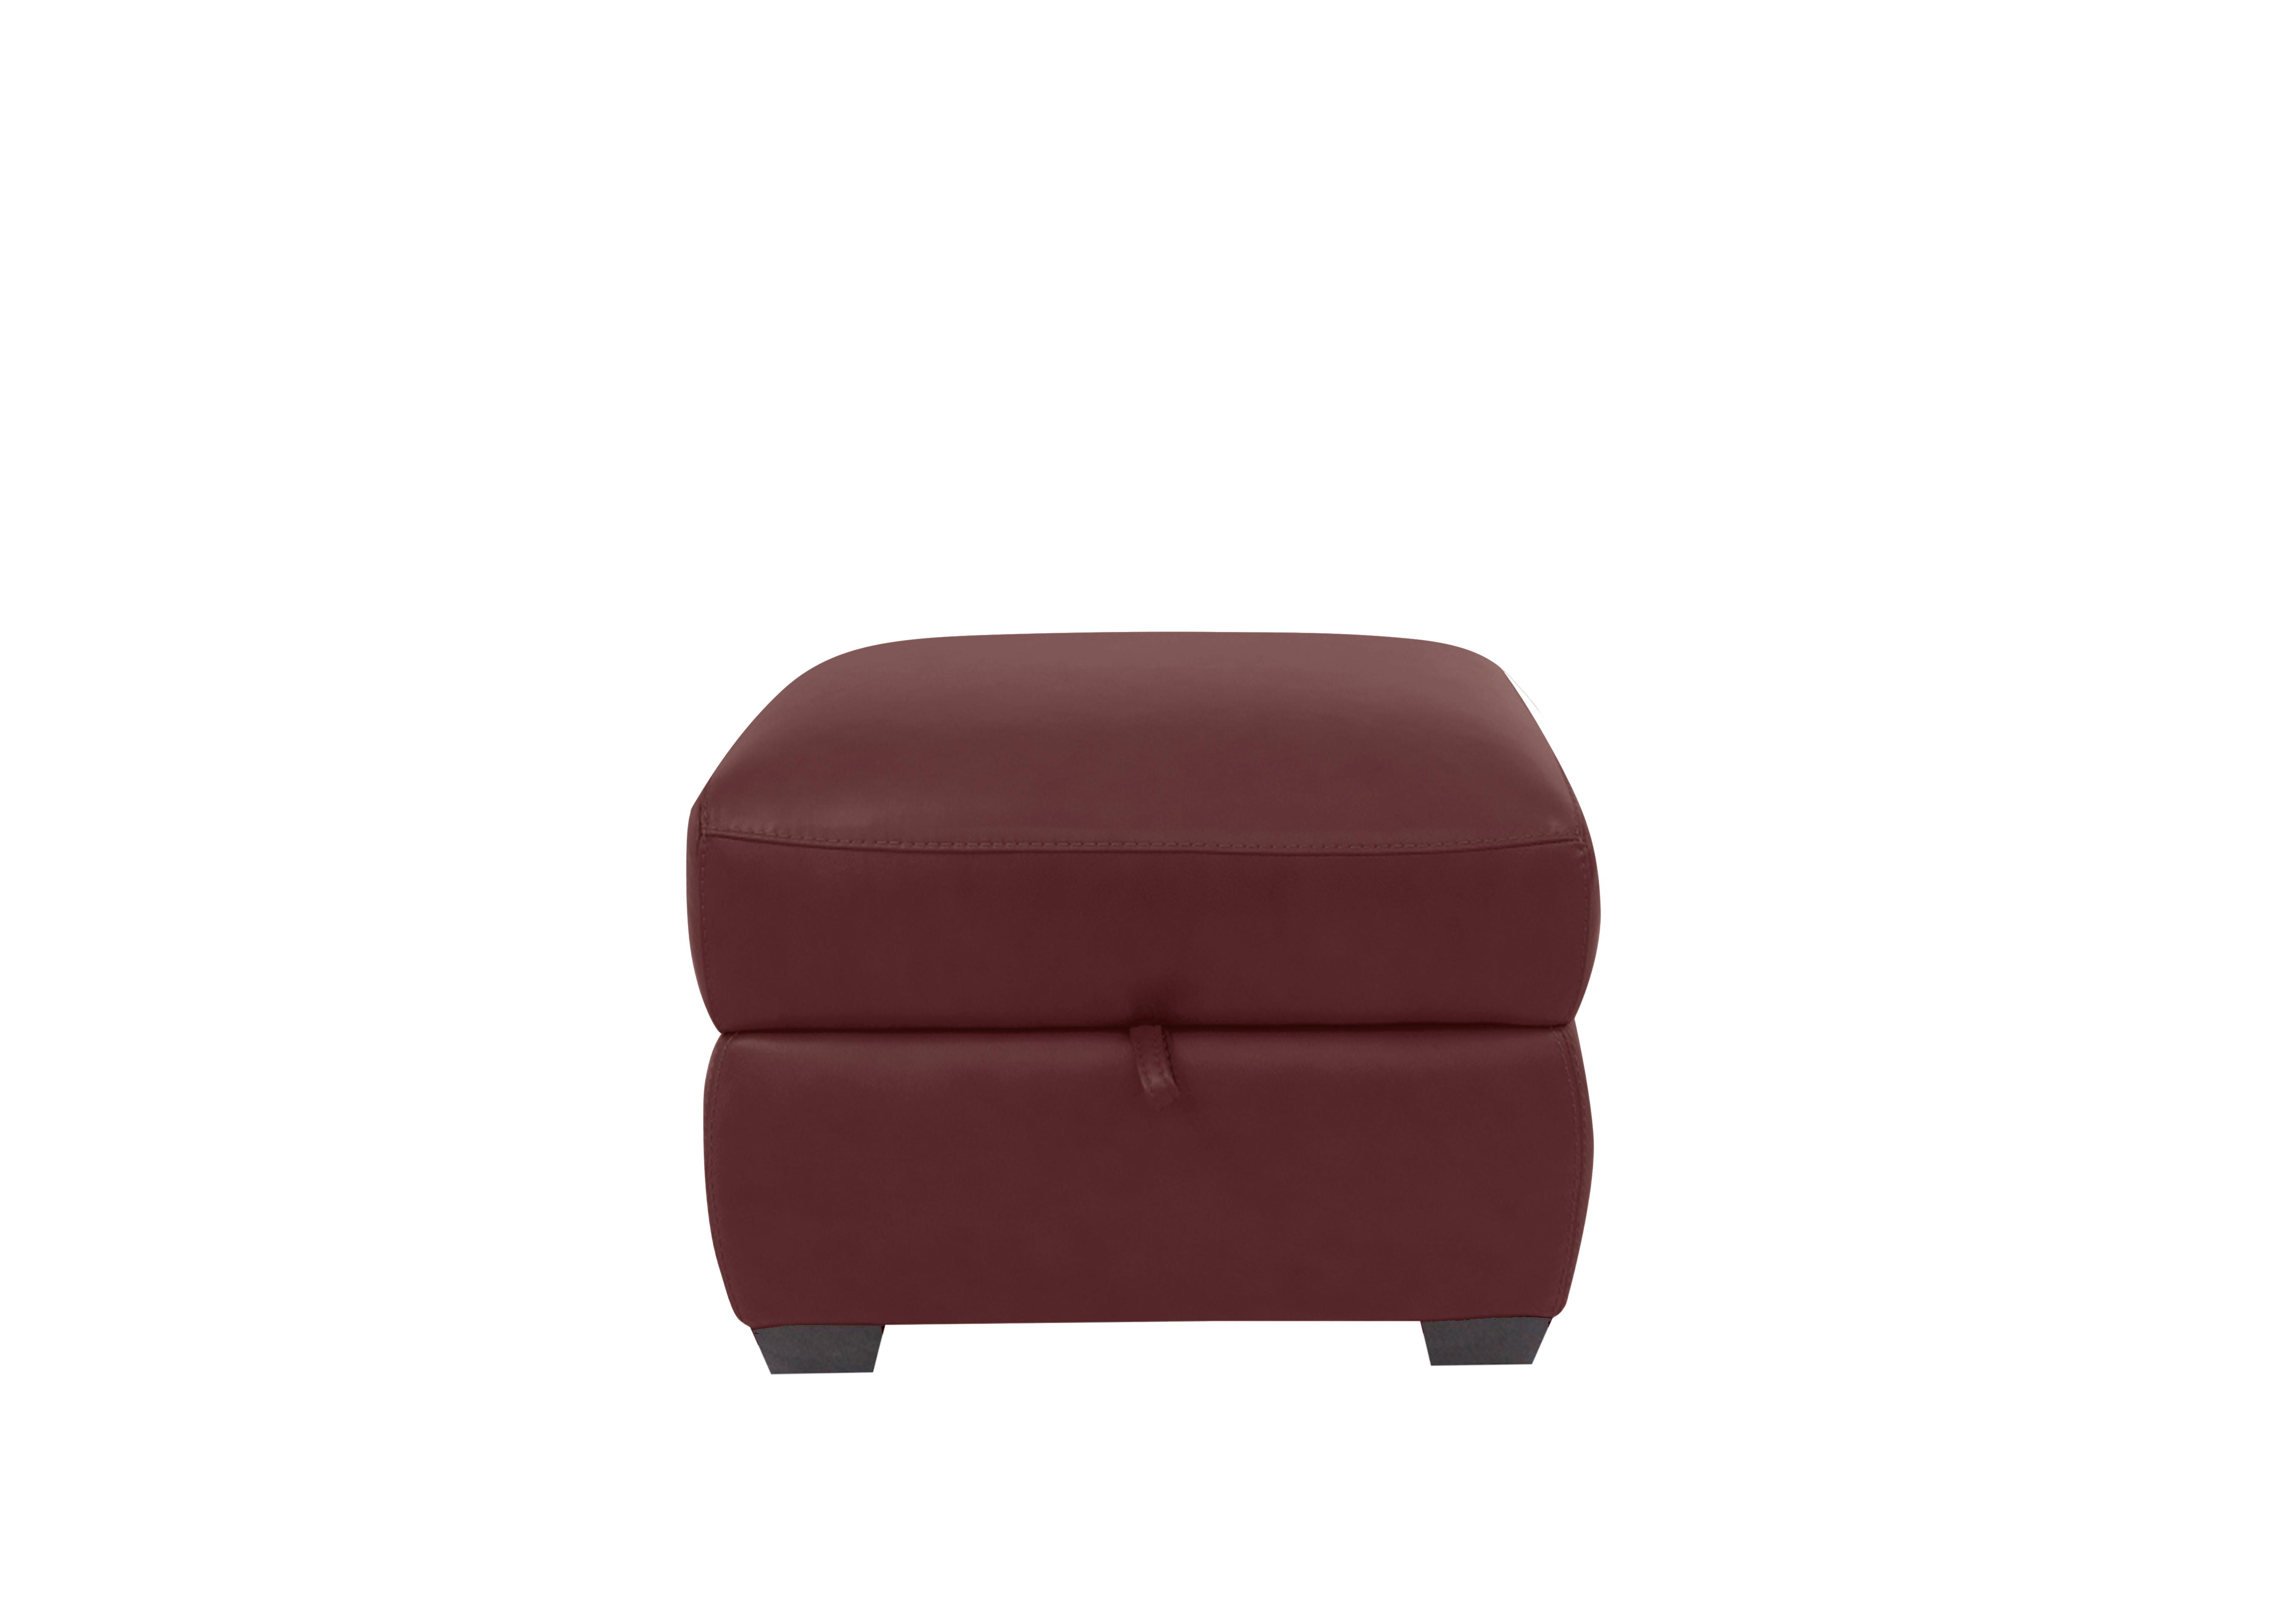 Cozee Leather Storage Stool in Bv-035c Deep Red on Furniture Village